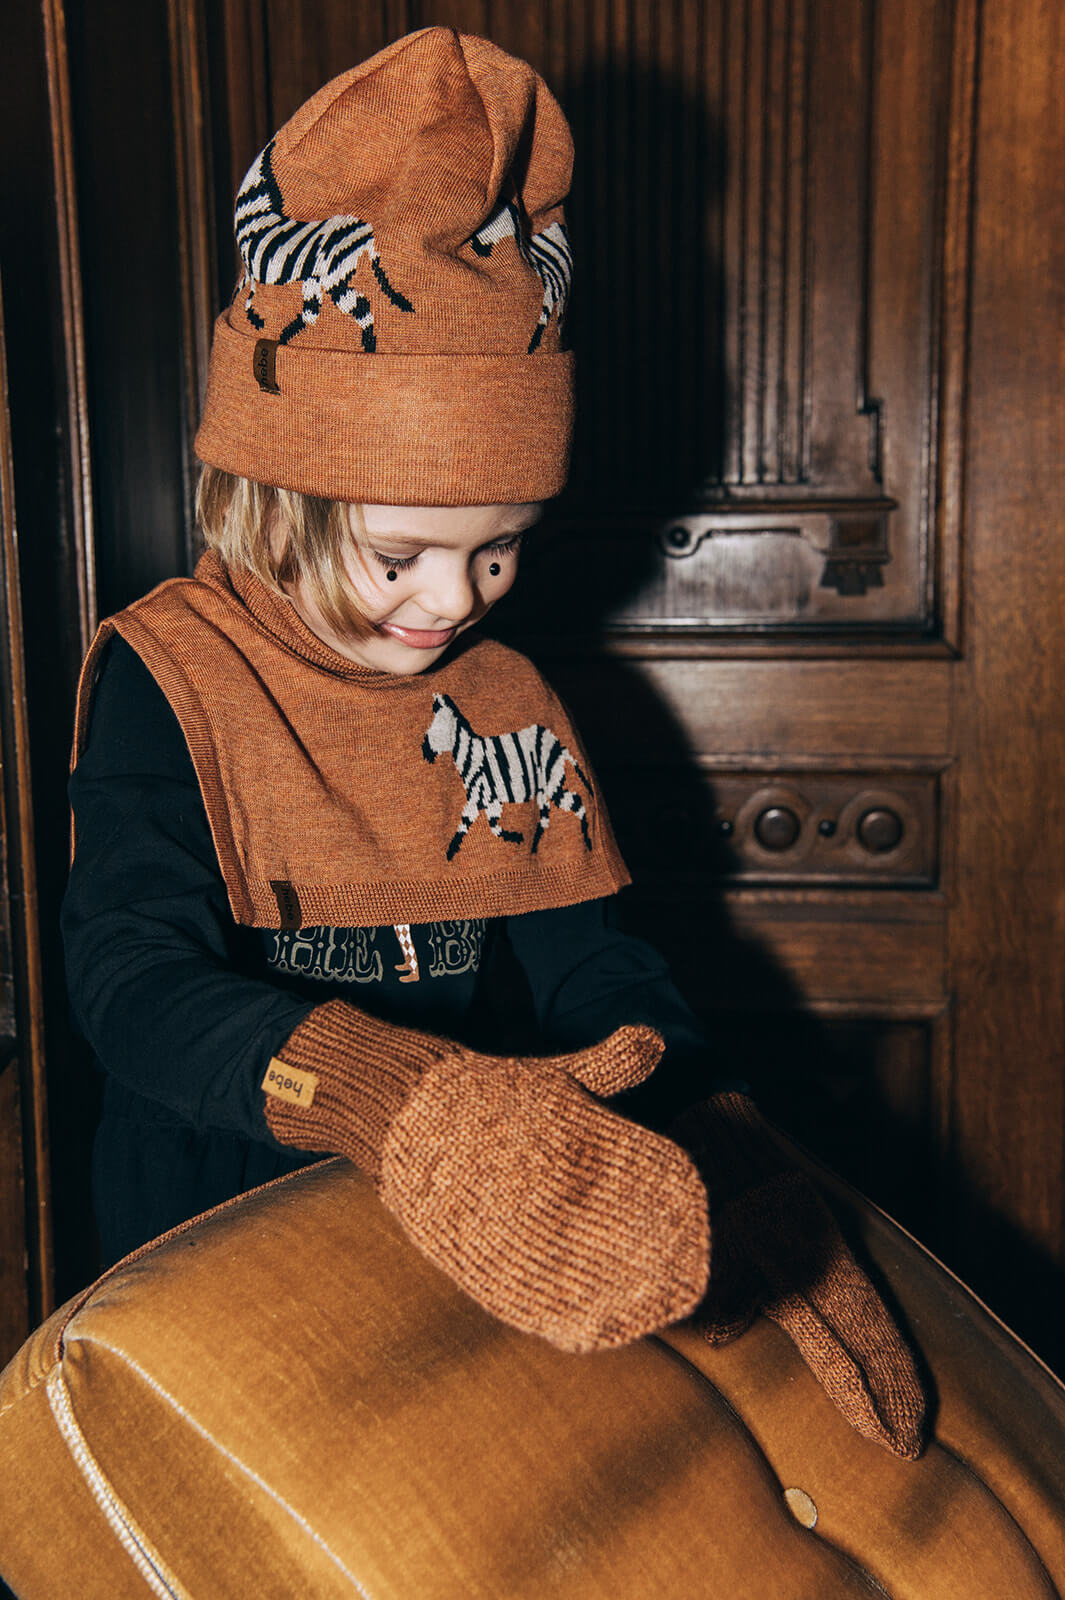 Shop babies, kids and tweens merino wool gloves, hats and winter essentials and items for ski trips online in Hong Kong and Singapore at MiliMilu.